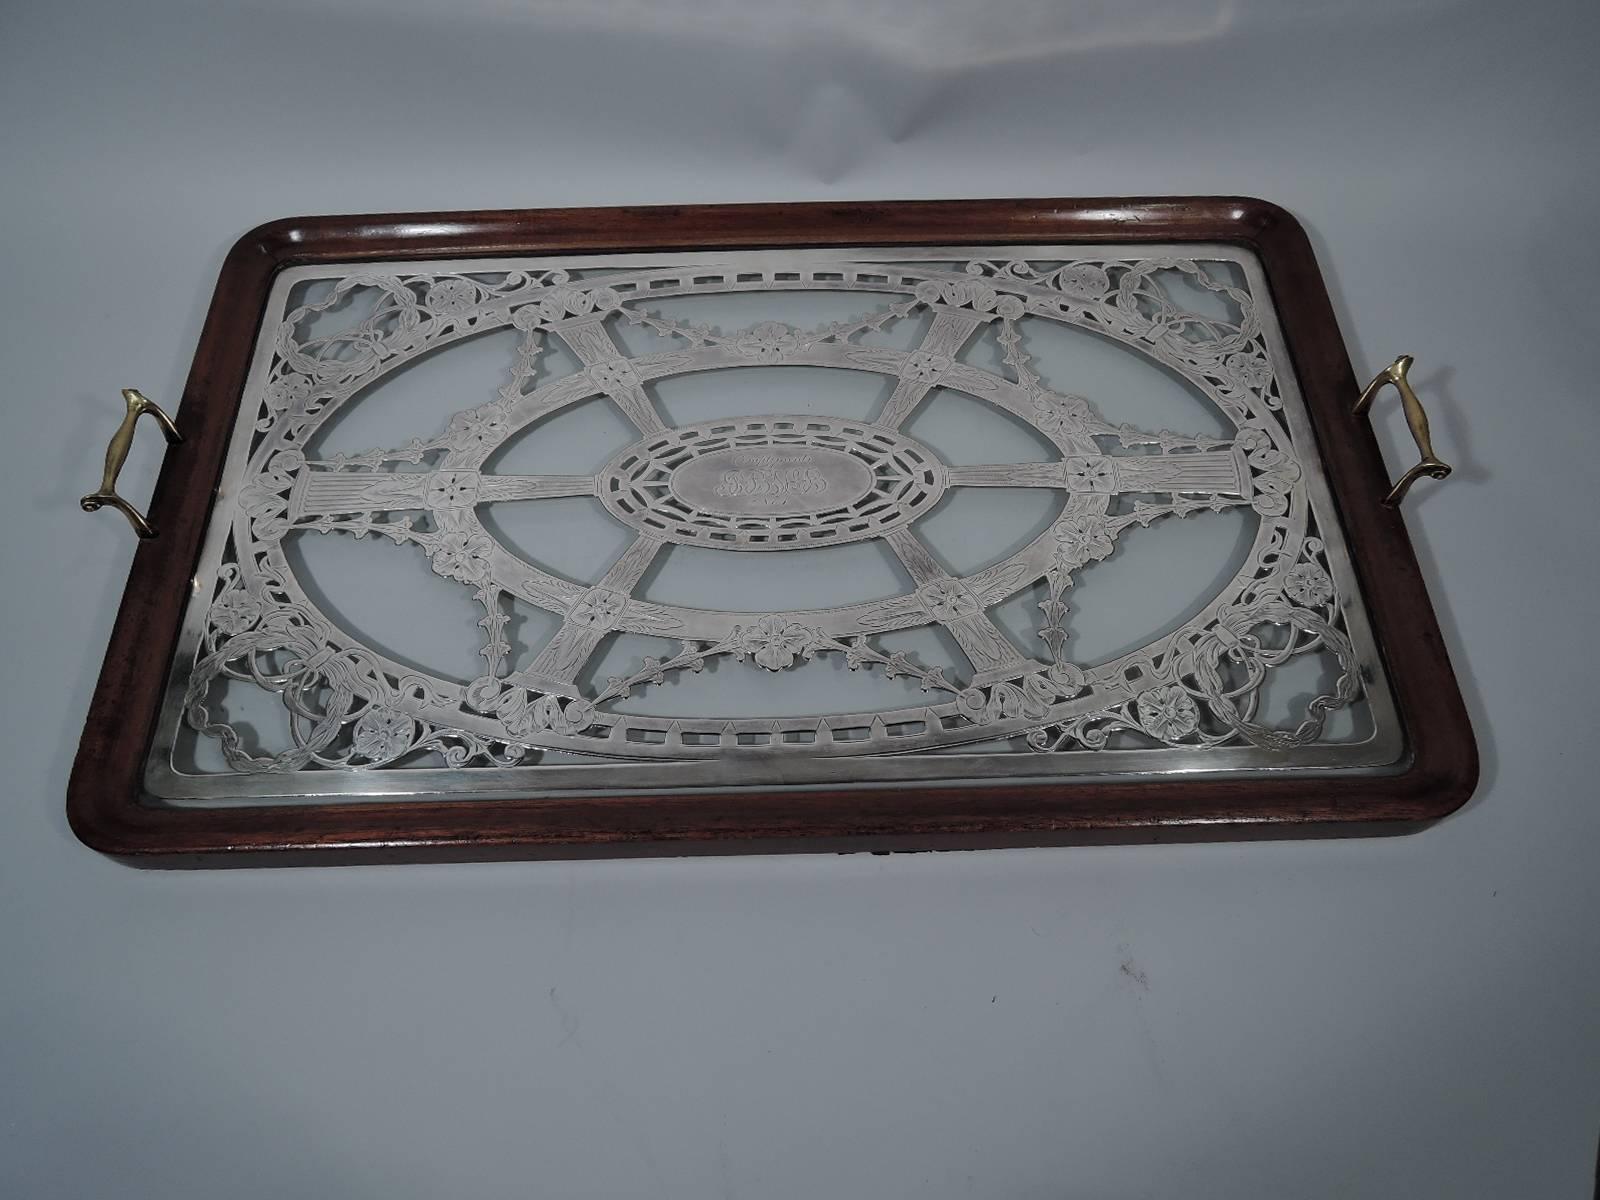 Rare antique American glass serving tray with silver overlay. Rectangular clear glass overlaid with neoclassical ornament. Central patera surrounded by fluted pilasters and garland. Corner wreaths. Engraved presentation. Glass set in stained-wood